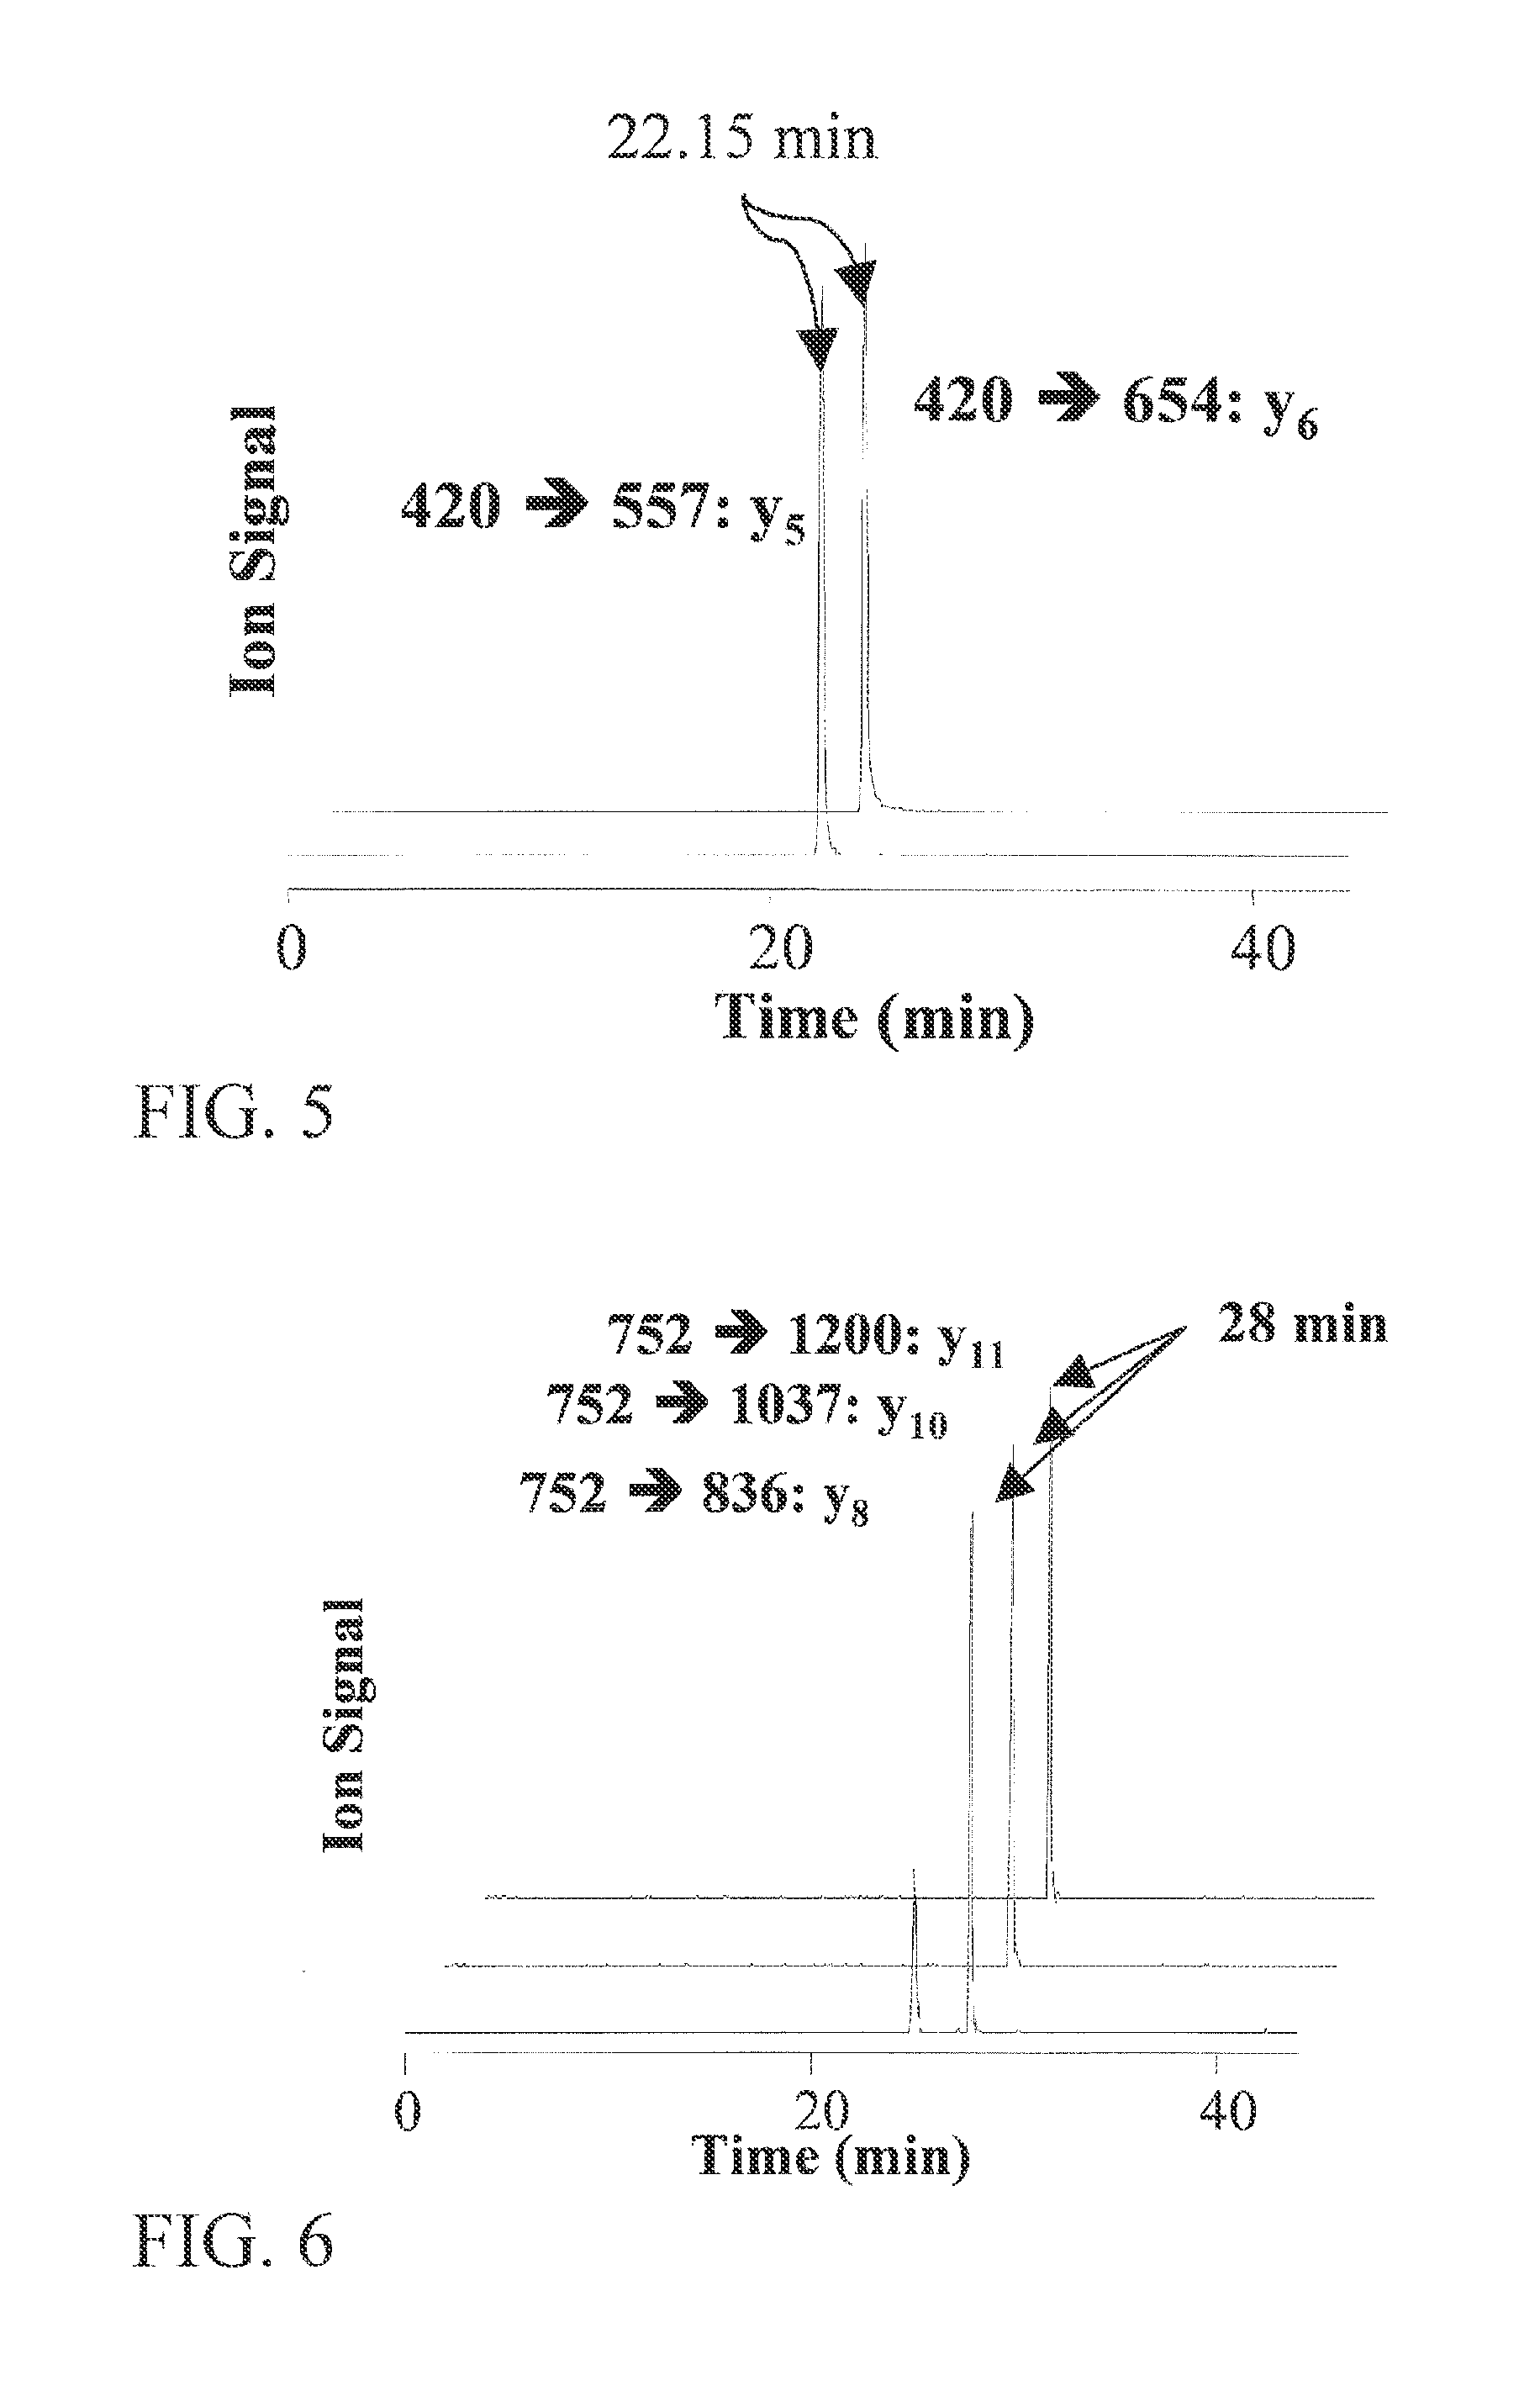 Methods and materials for monitoring myeloma using quantitative mass spectrometry